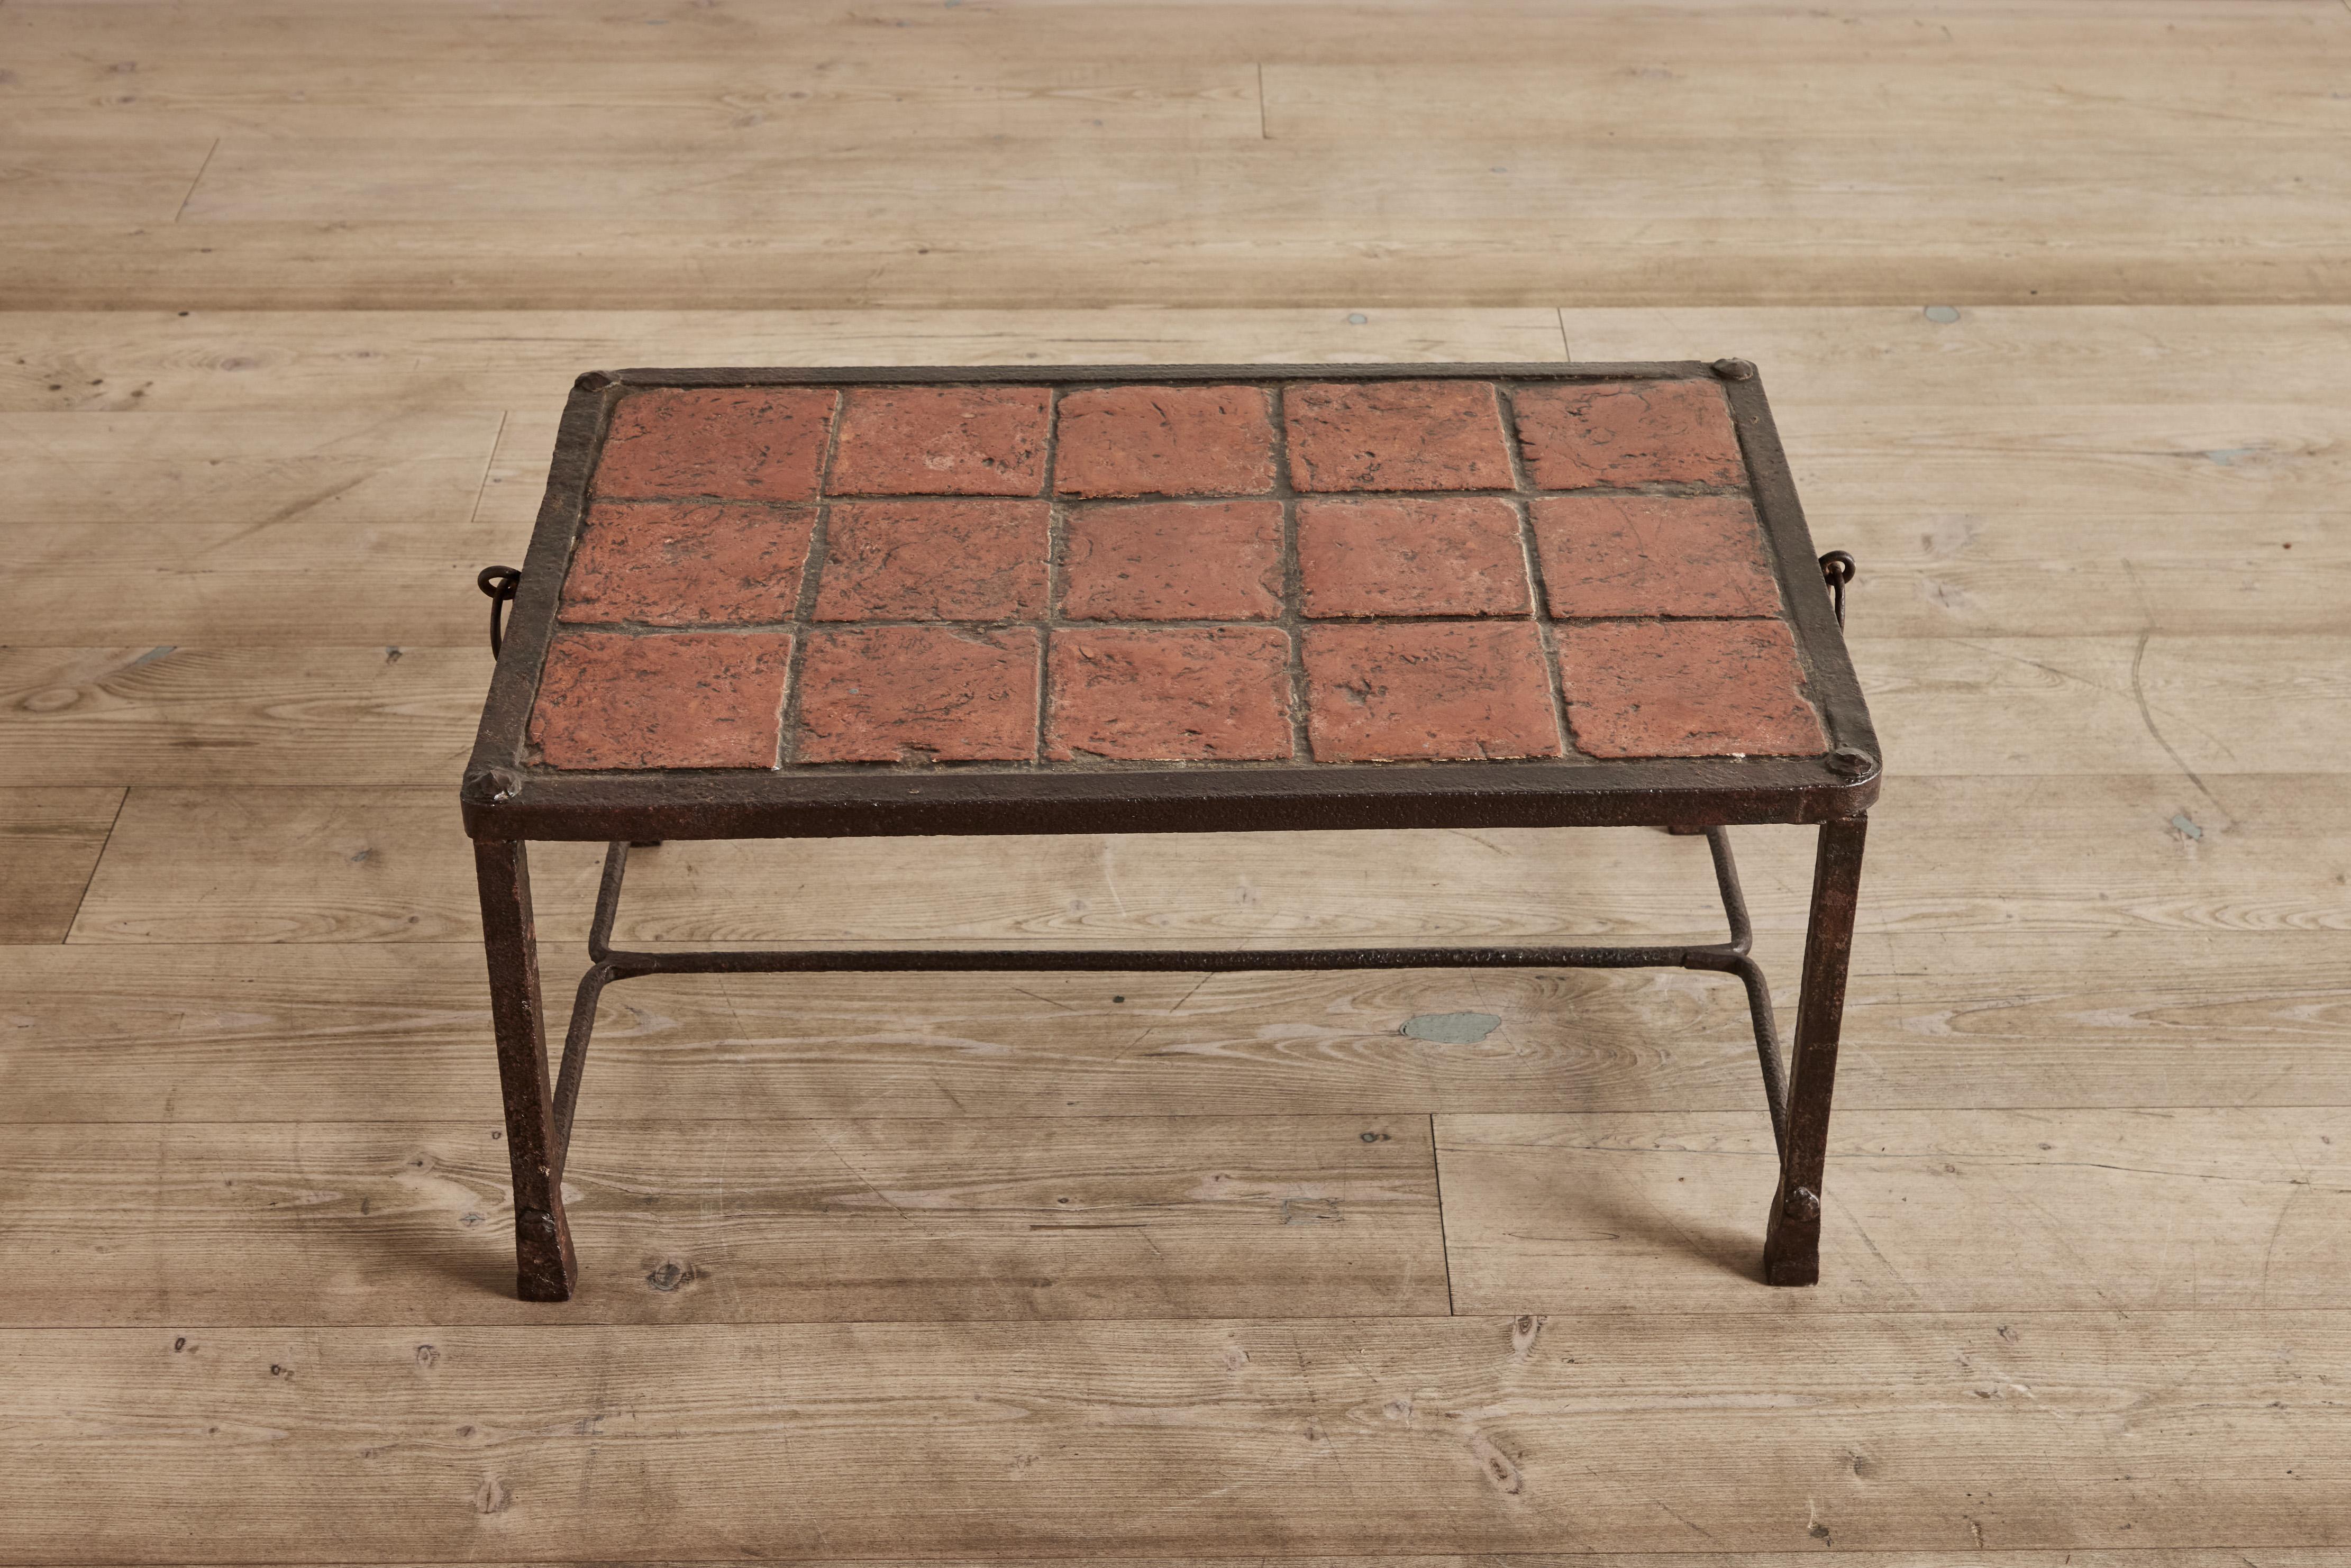 Spanish Tile & Iron Coffee Table In Good Condition For Sale In Los Angeles, CA